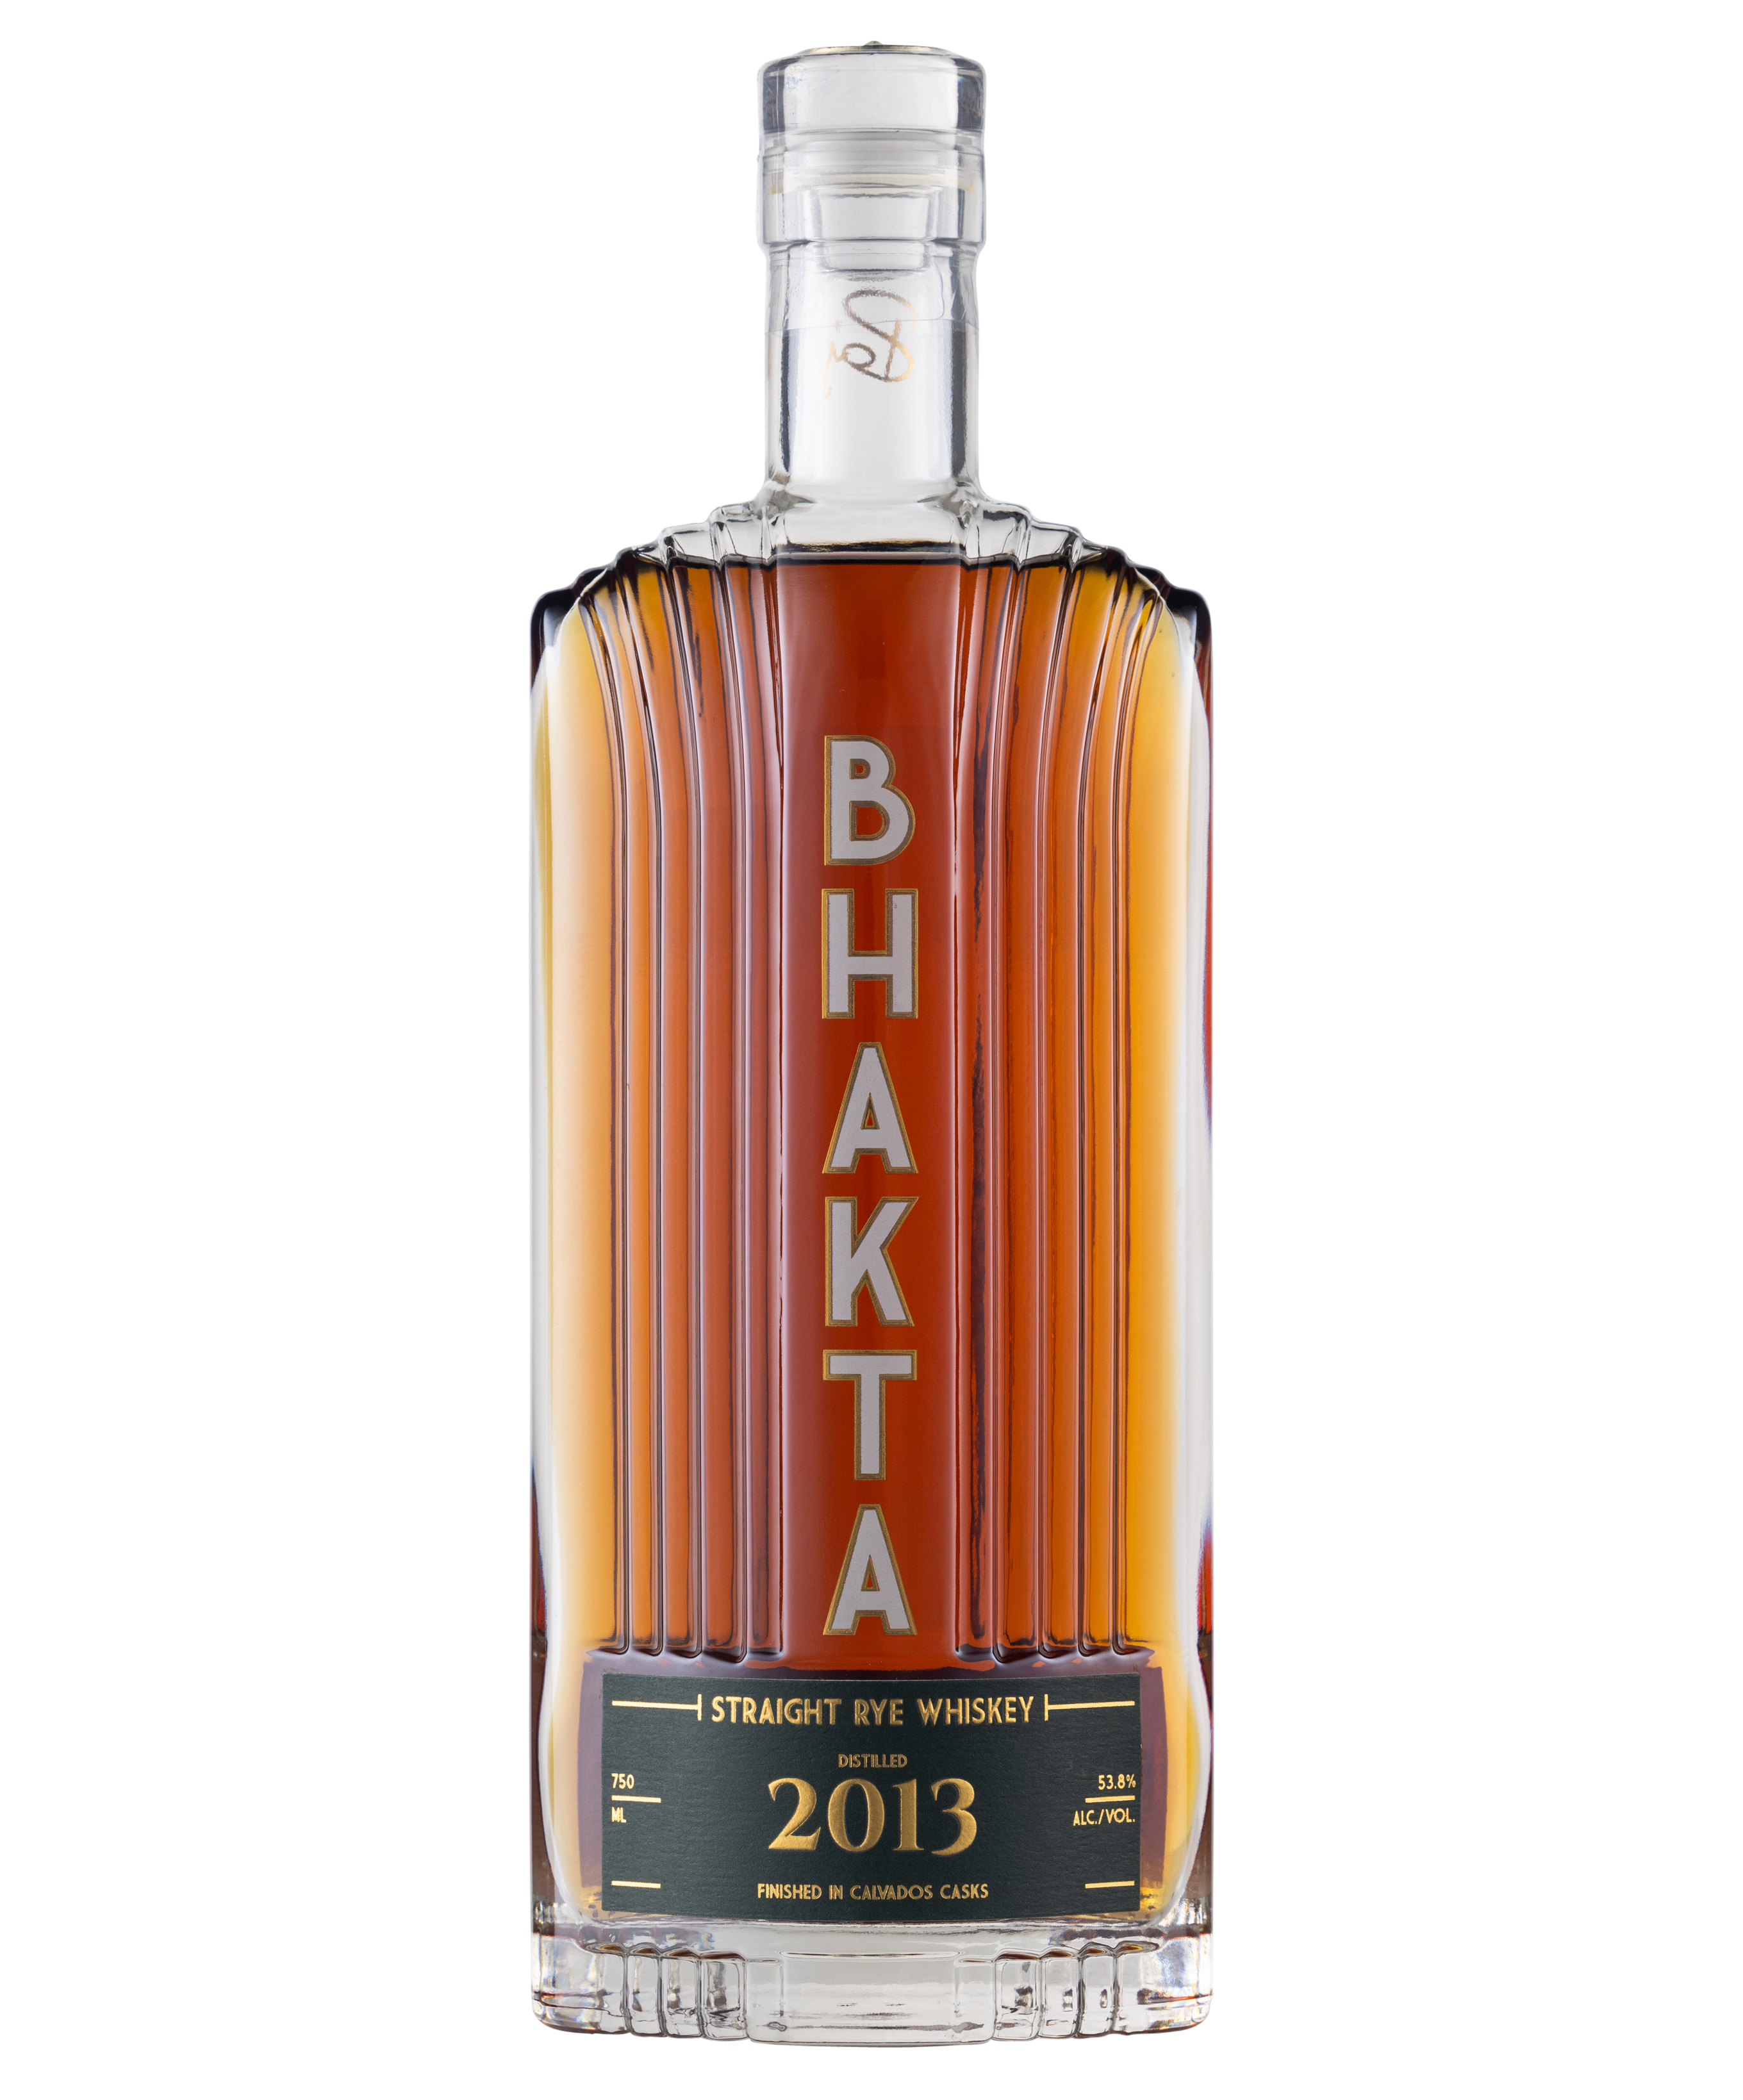 Bhakta 2013 Straight Rye Whiskey Finished in Calvados Casks (750ml)